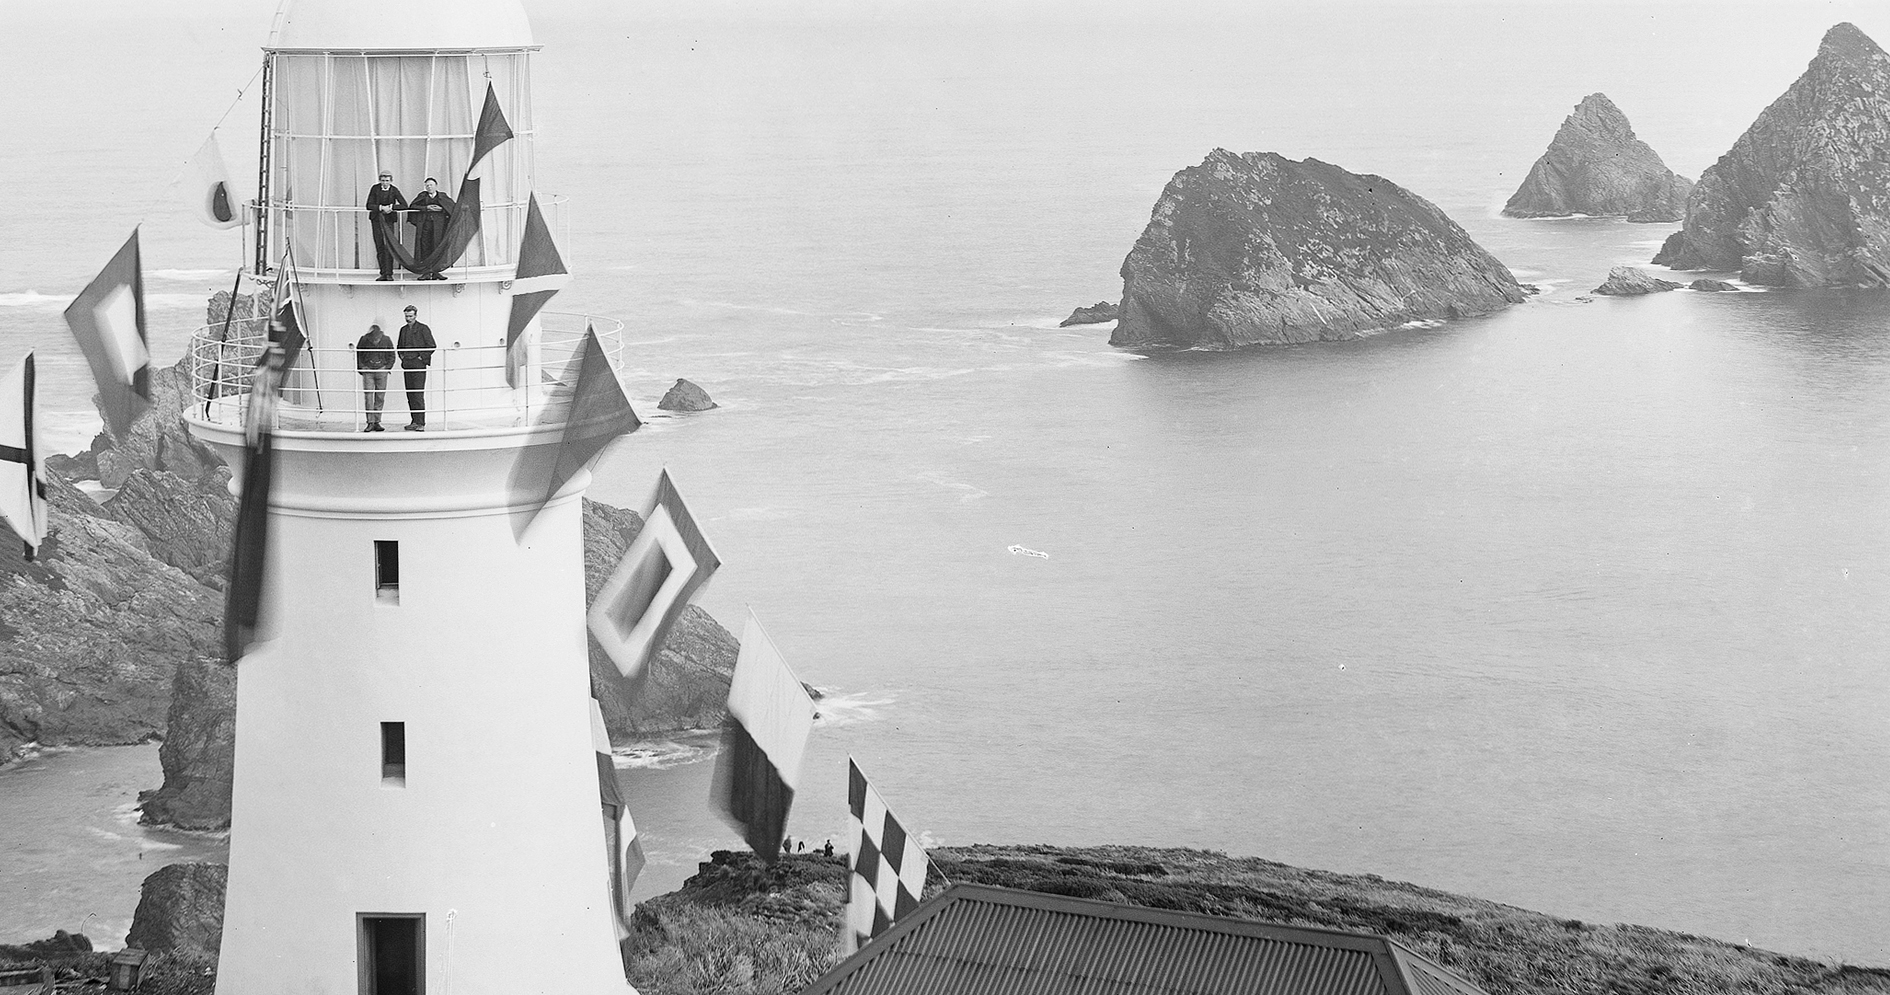  black and white photo of a lighthouse on maatsuyker island in 1891